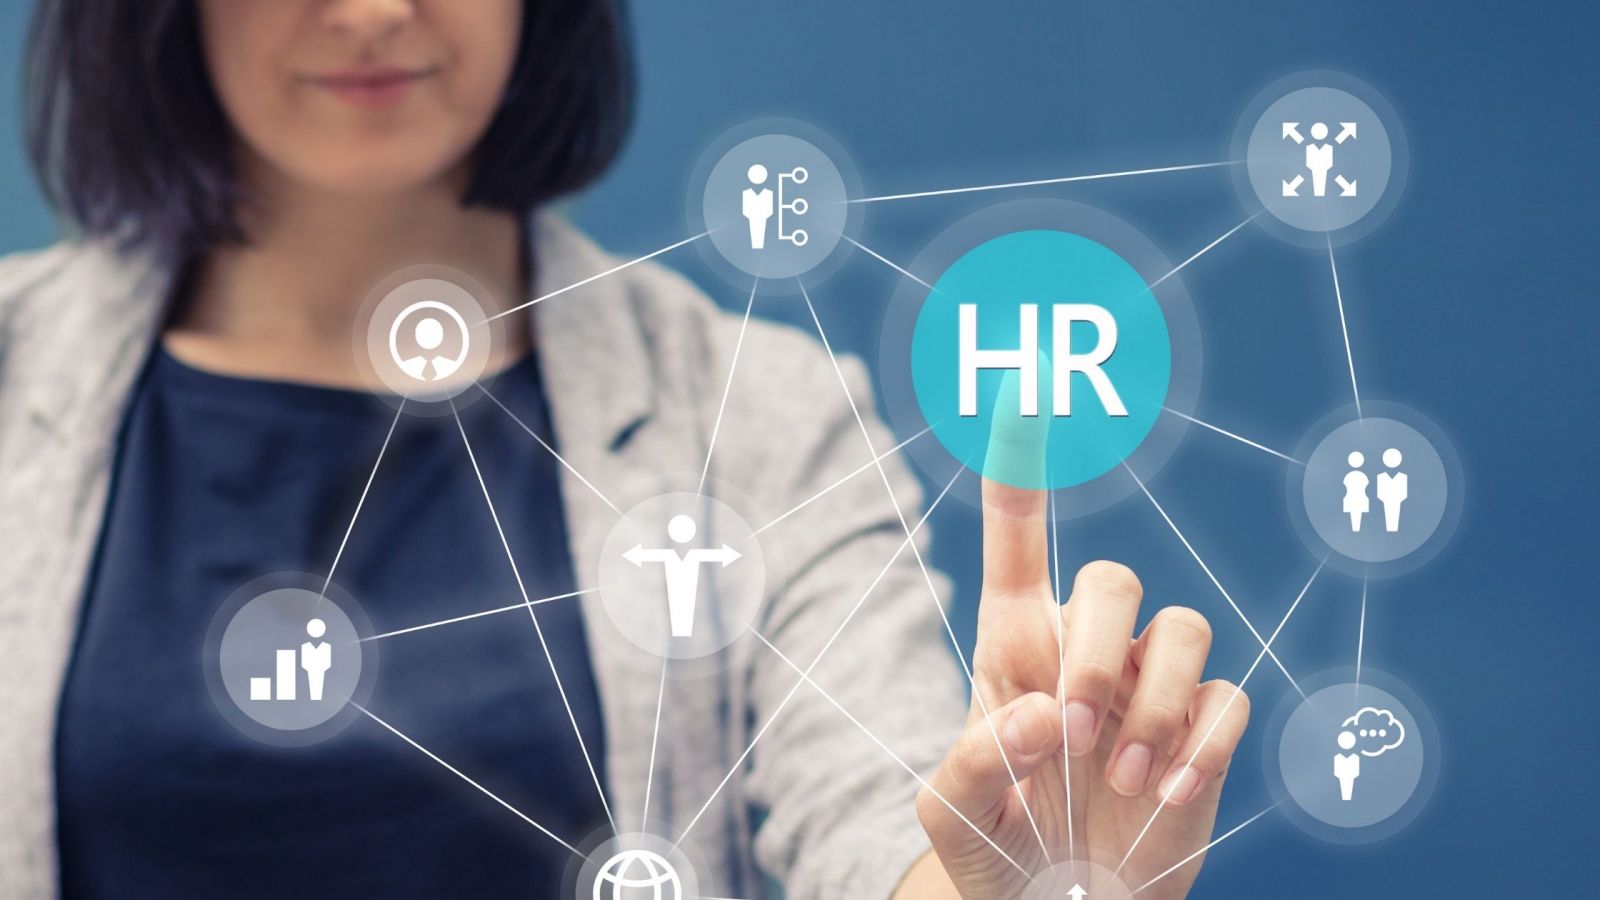 The different functions of an HR department